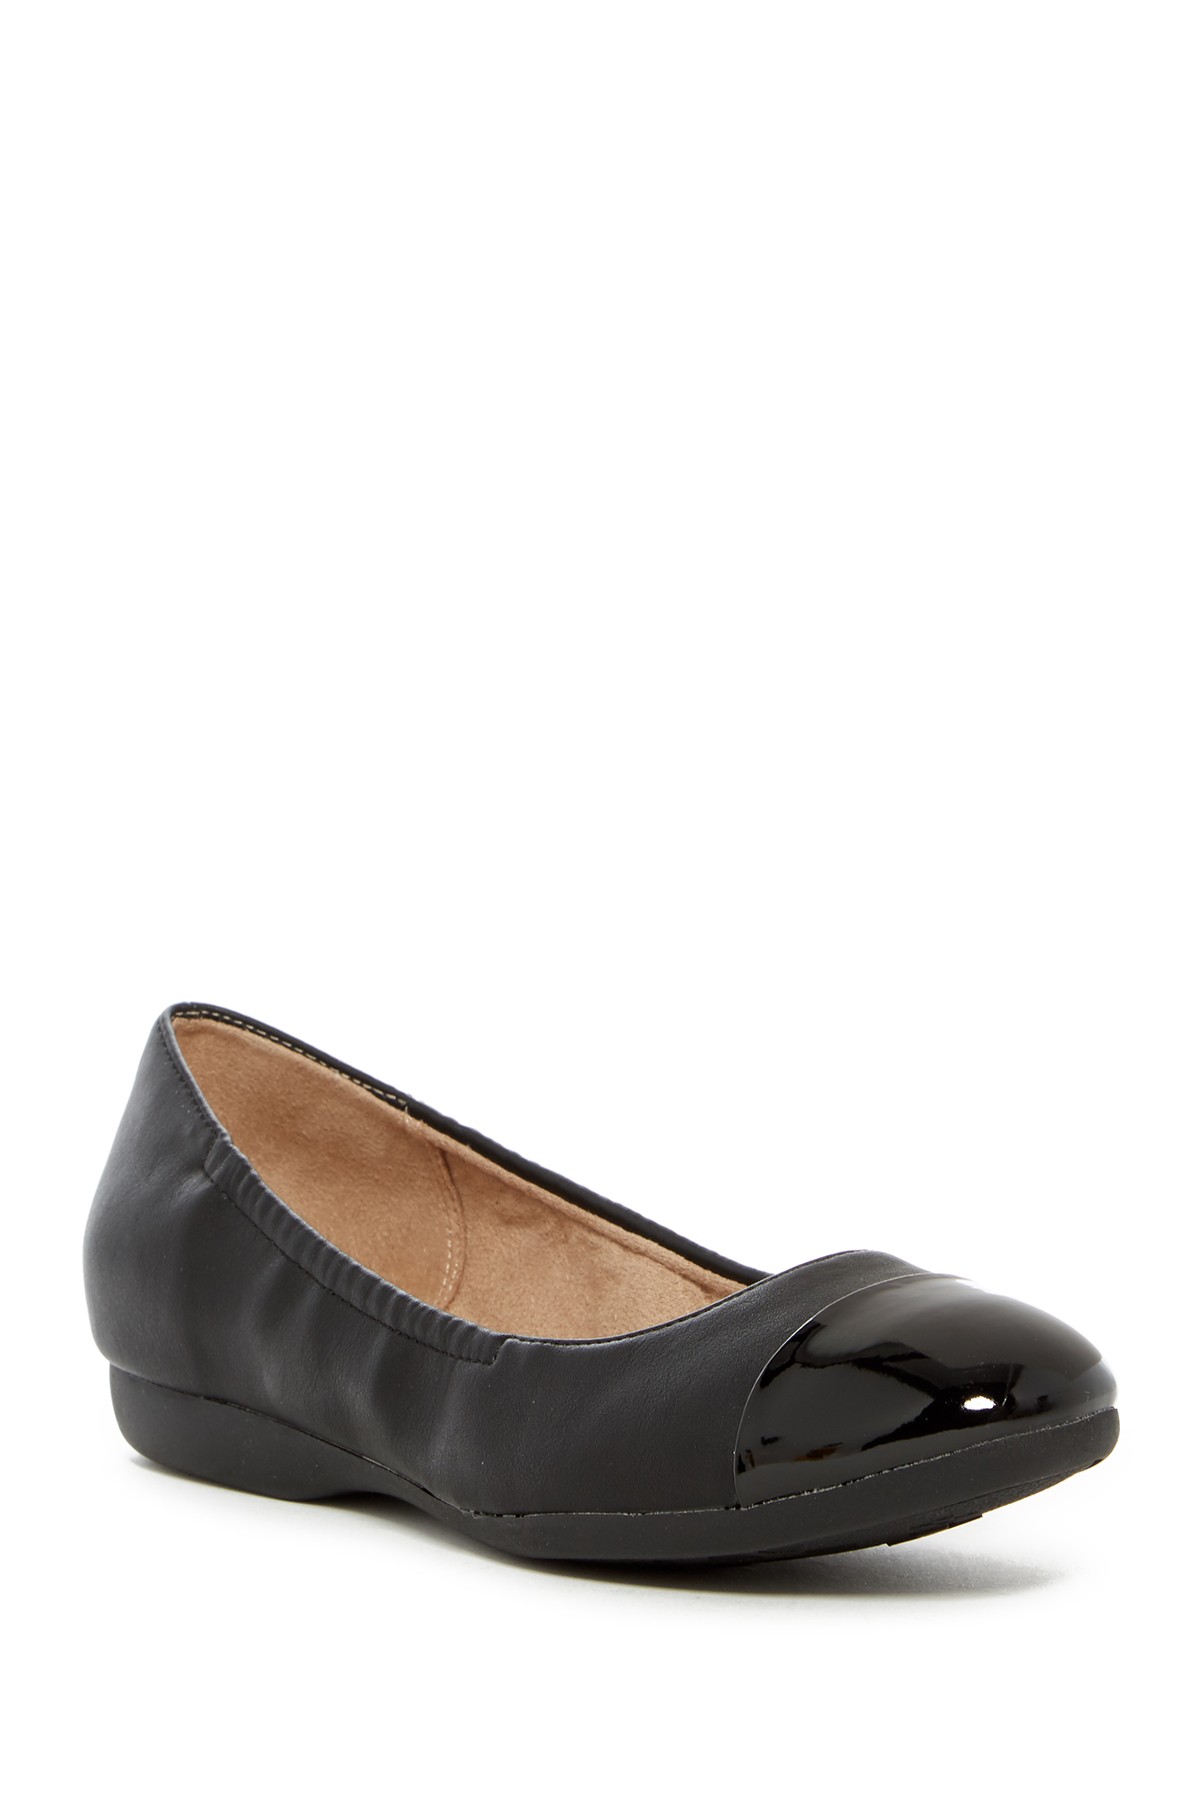 Naturalizer | Campo Cap Toe Flat - Wide Width Available | Nordstrom Rack